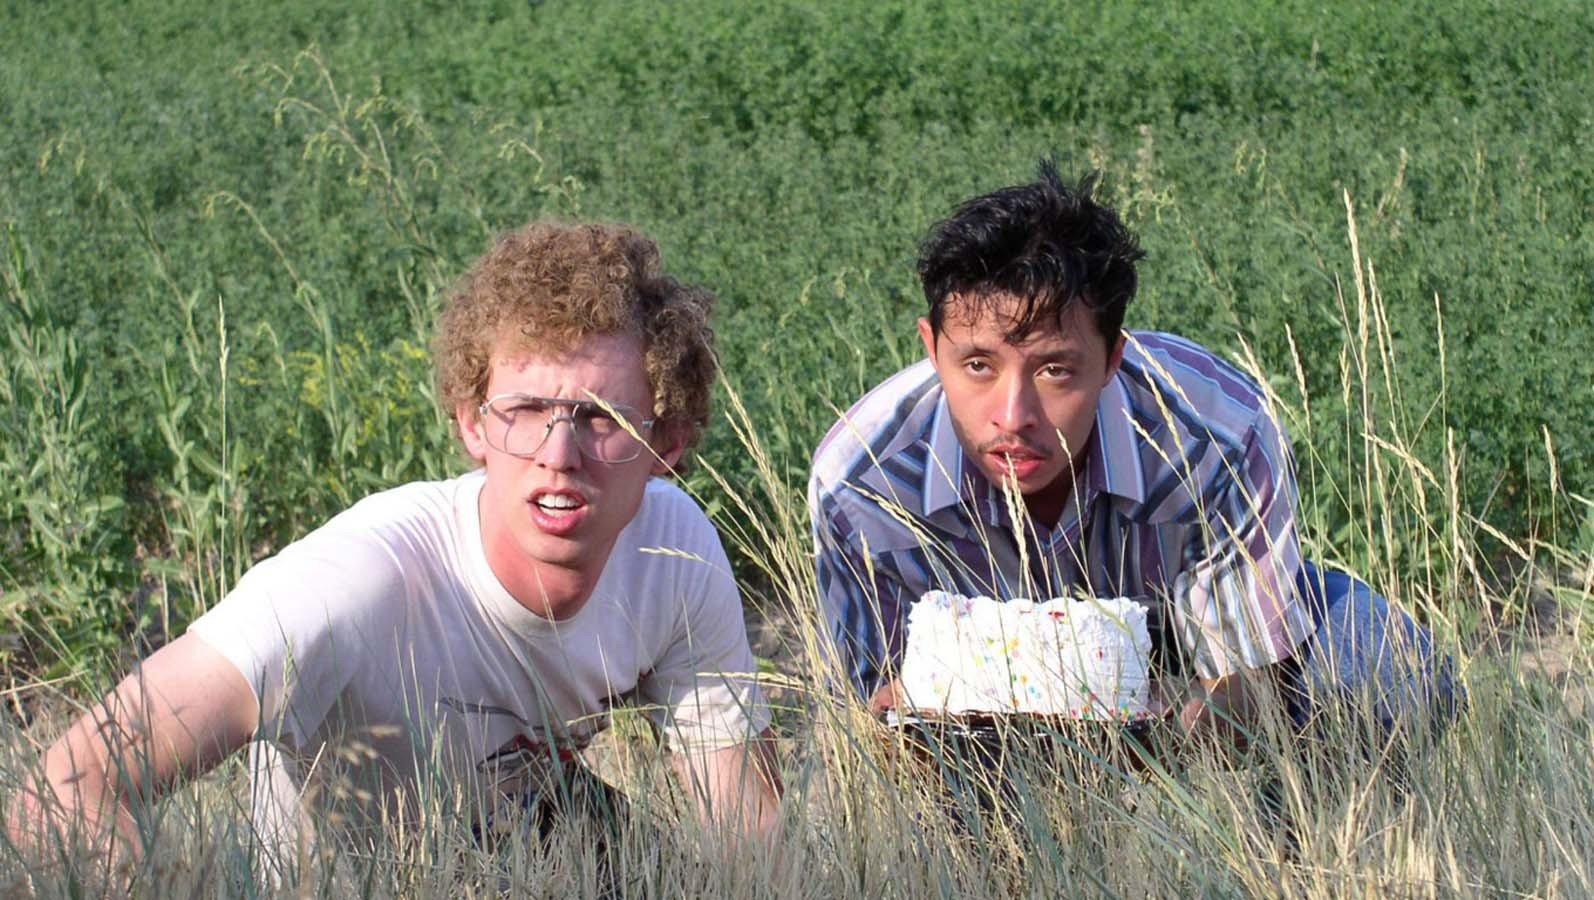 Napoleon Dynamite HD Wallpapers / Desktop and Mobile Images & Photos.